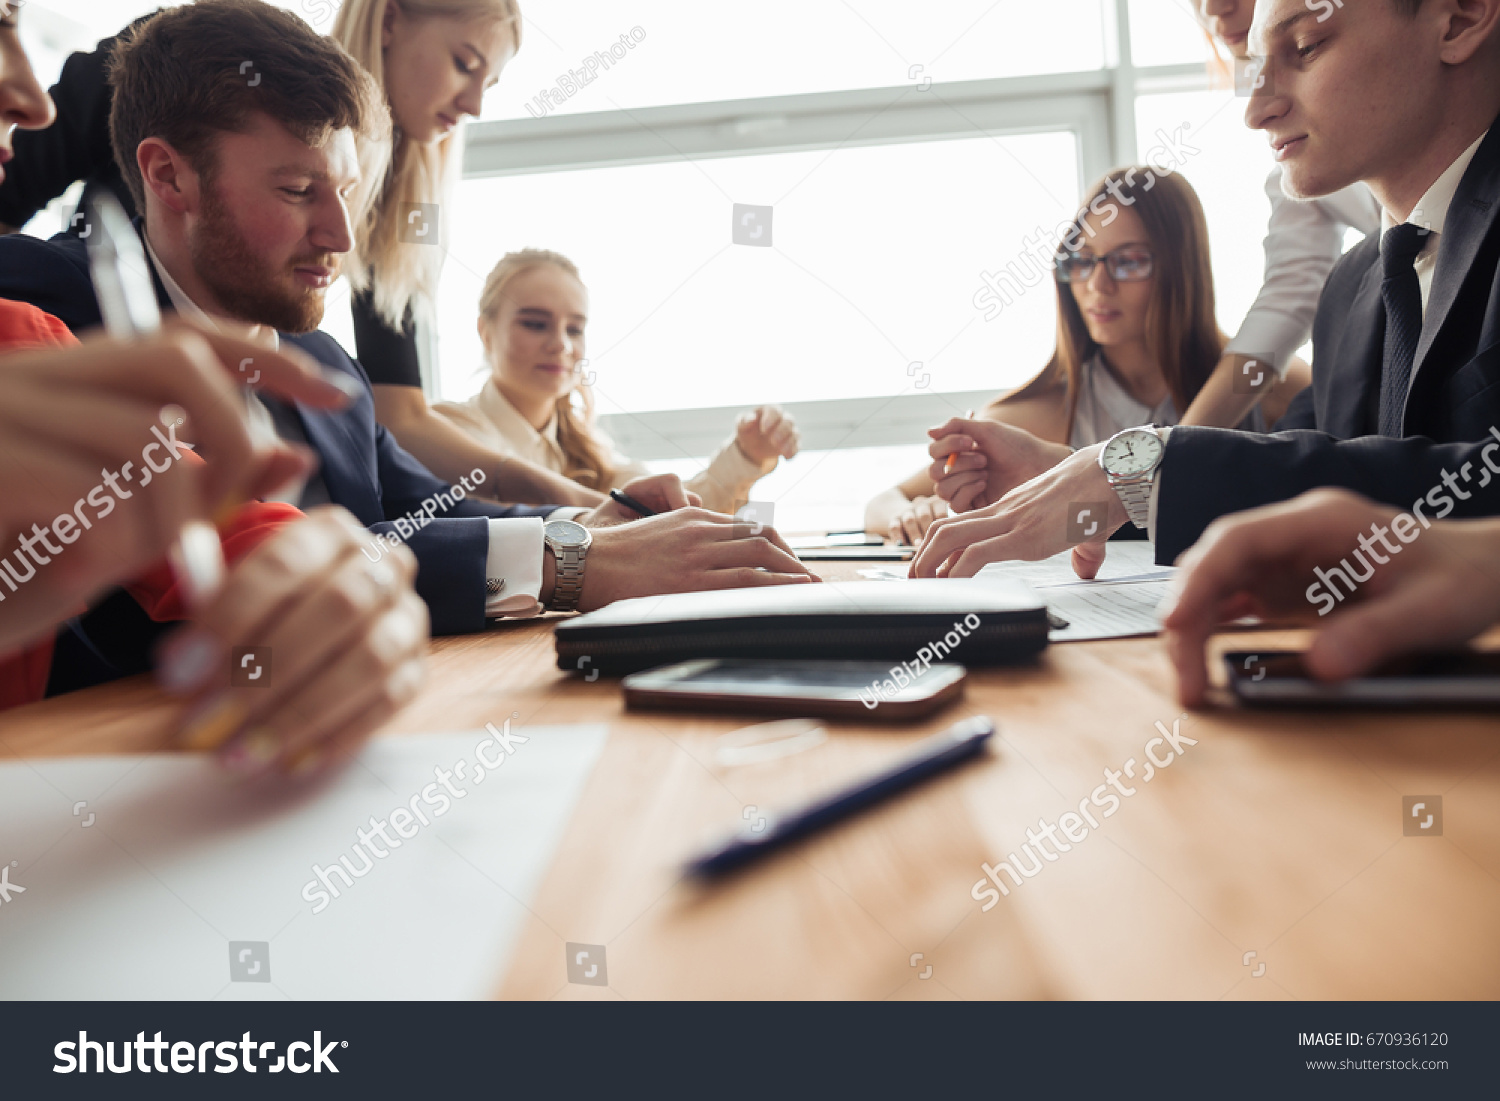 Businesspeople discussing together in conference room during meeting at office #670936120